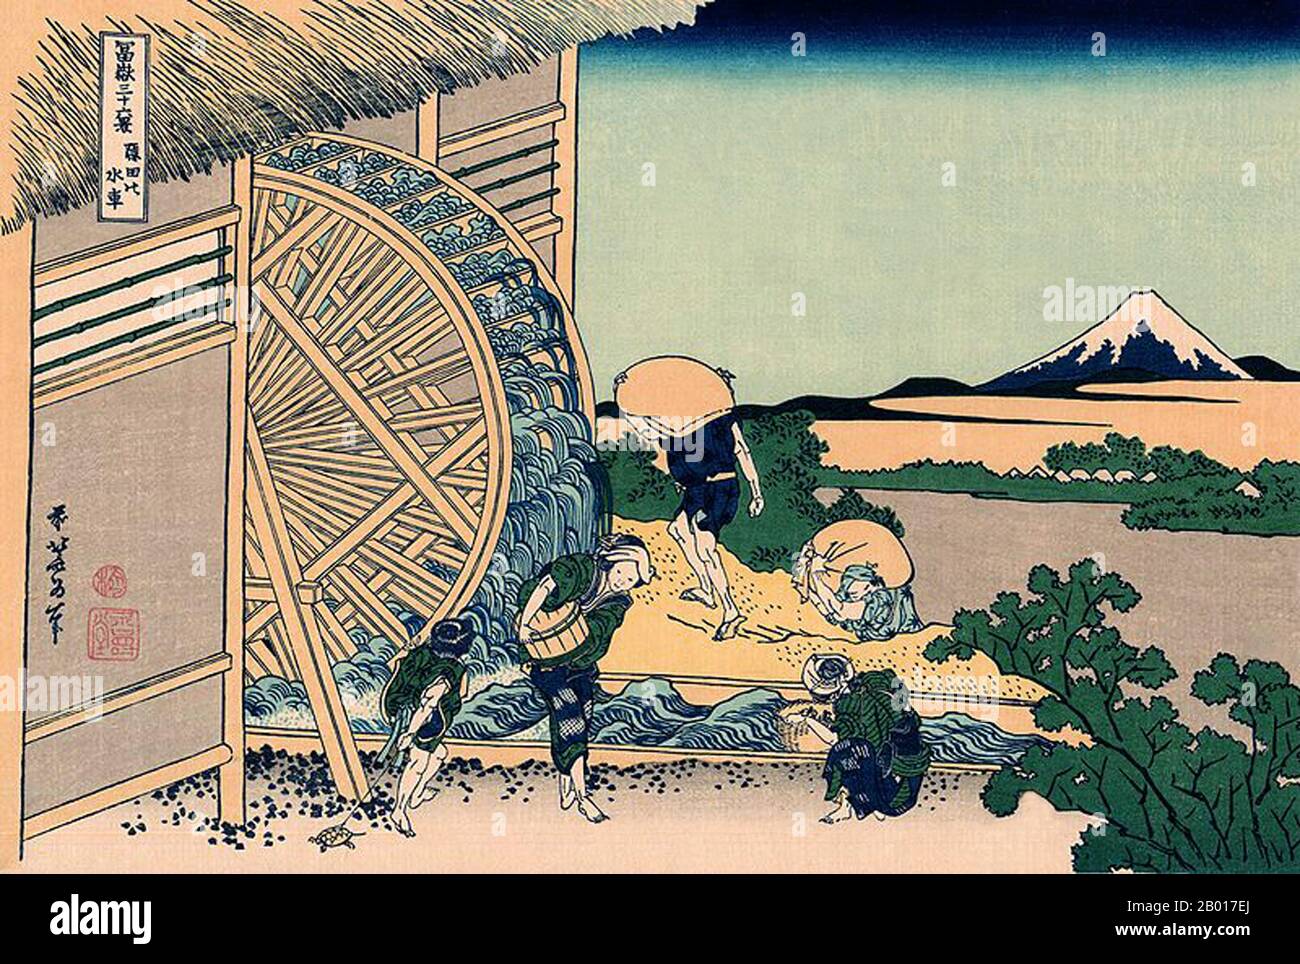 Japan: ‘The Waterwheel at Onden’. Ukiyo-e woodblock print from the series ‘Thirty-Six Views of Mount Fuji’ by Katsushika Hokusai (31 October 1760 - 10 May 1849), 1830.  ‘Thirty-six Views of Mount Fuji’ is an ‘ukiyo-e’ series of woodcut prints by Japanese artist Katsushika Hokusai. The series depicts Mount Fuji in differing seasons and weather conditions from a variety of places and distances. It actually consists of 46 prints created between 1826 and 1833. The first 36 were included in the original publication and, due to their popularity, 10 more were added after the original publication. Stock Photo